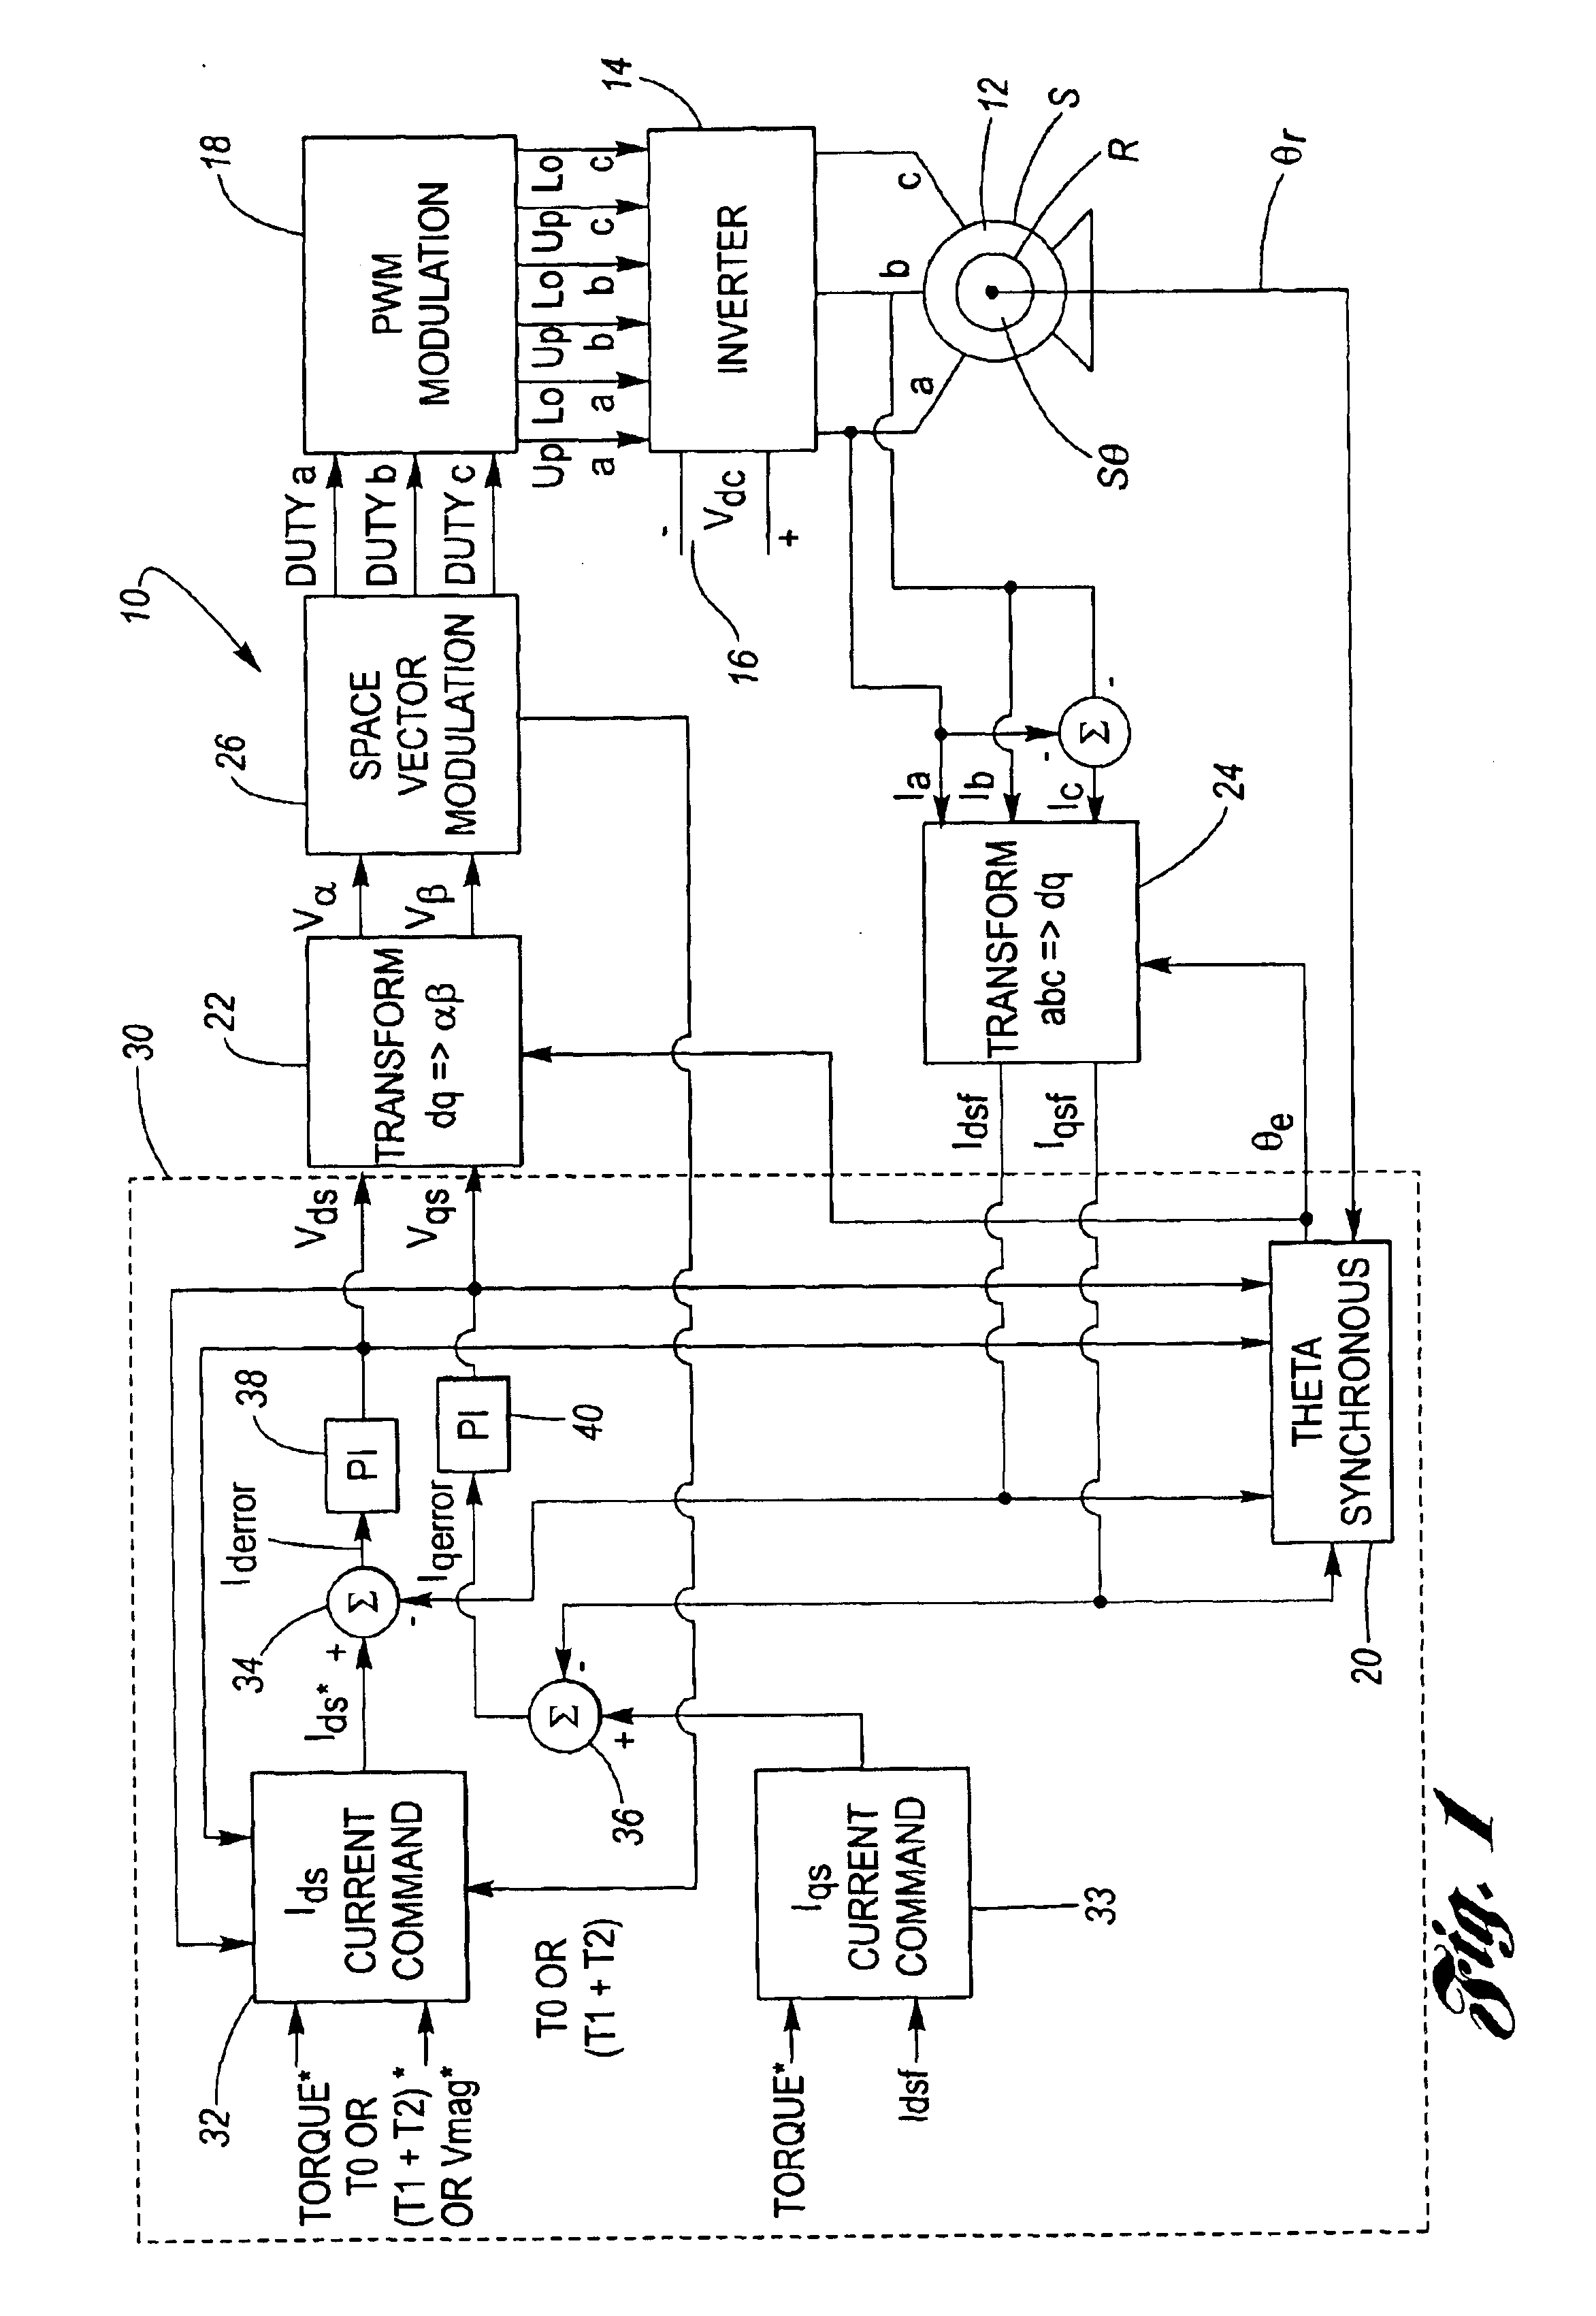 System and method for clamp current regulation of induction machines